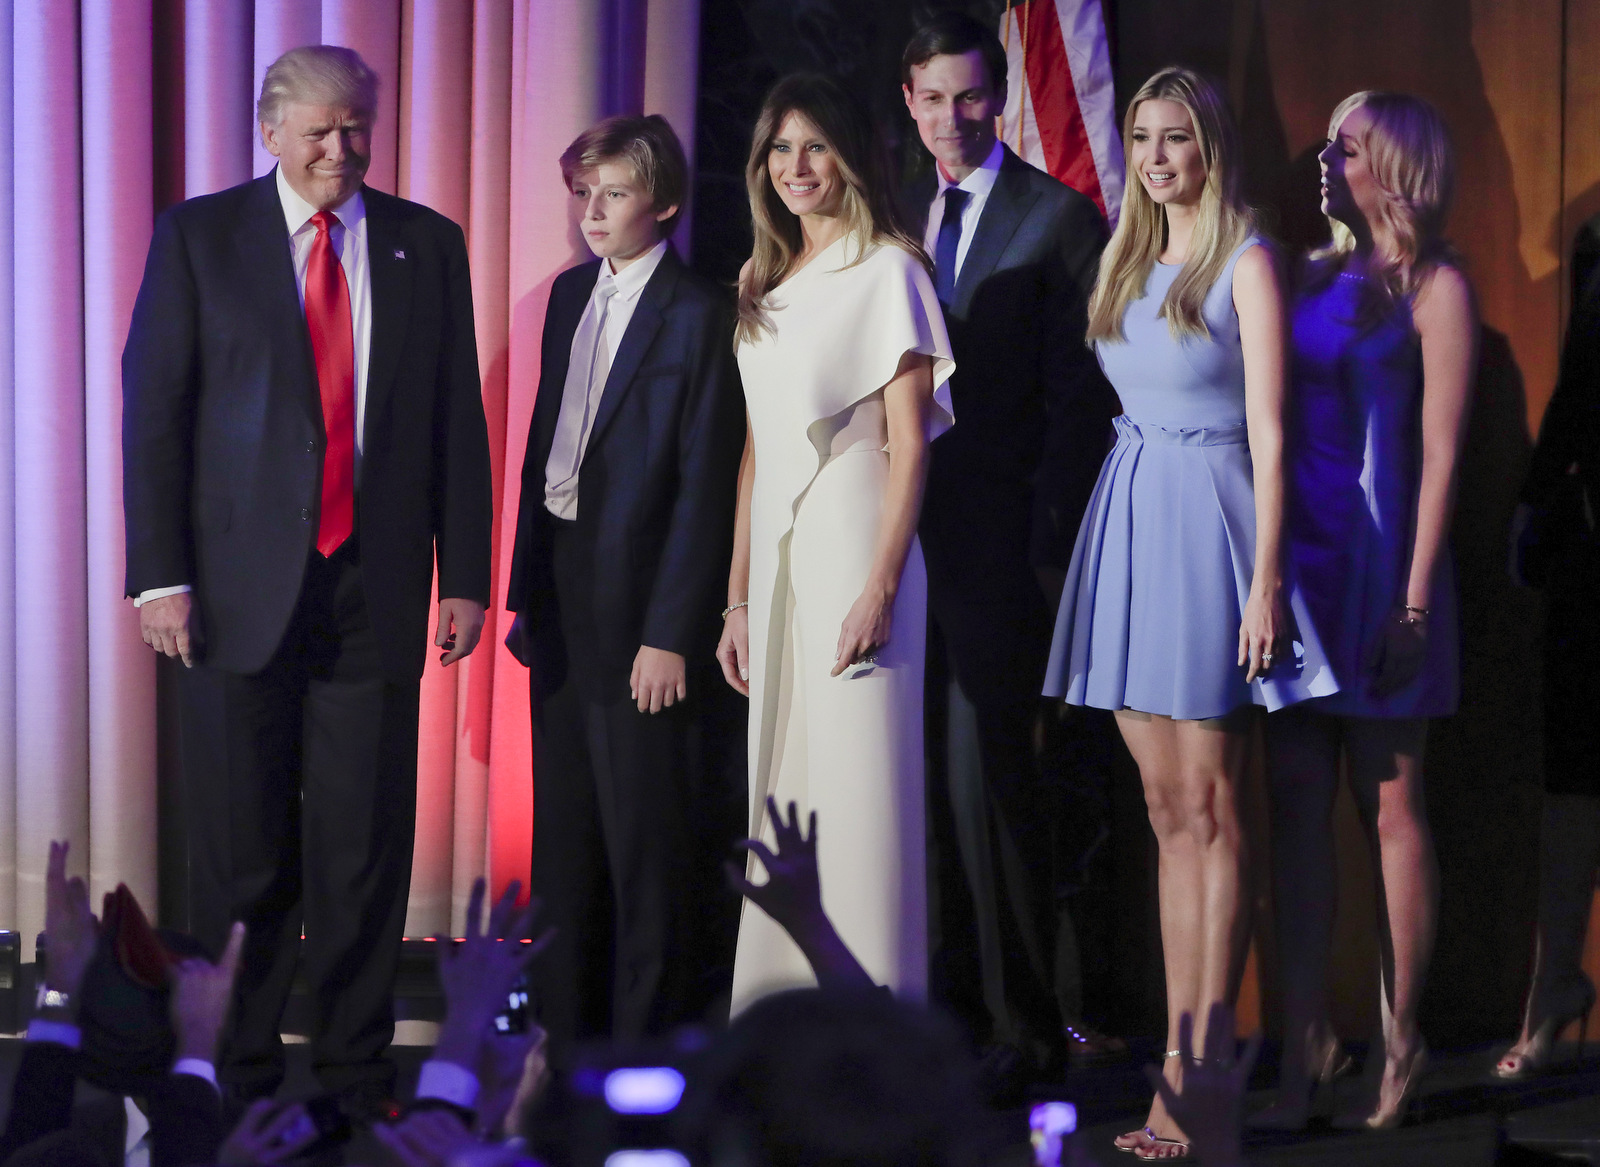 President elect Donald Trump, left, arrives with his family to give his acceptance speech at an election night rally, Wednesday, Nov. 9, 2016, in New York. (AP Photo/Julie Jacobson)